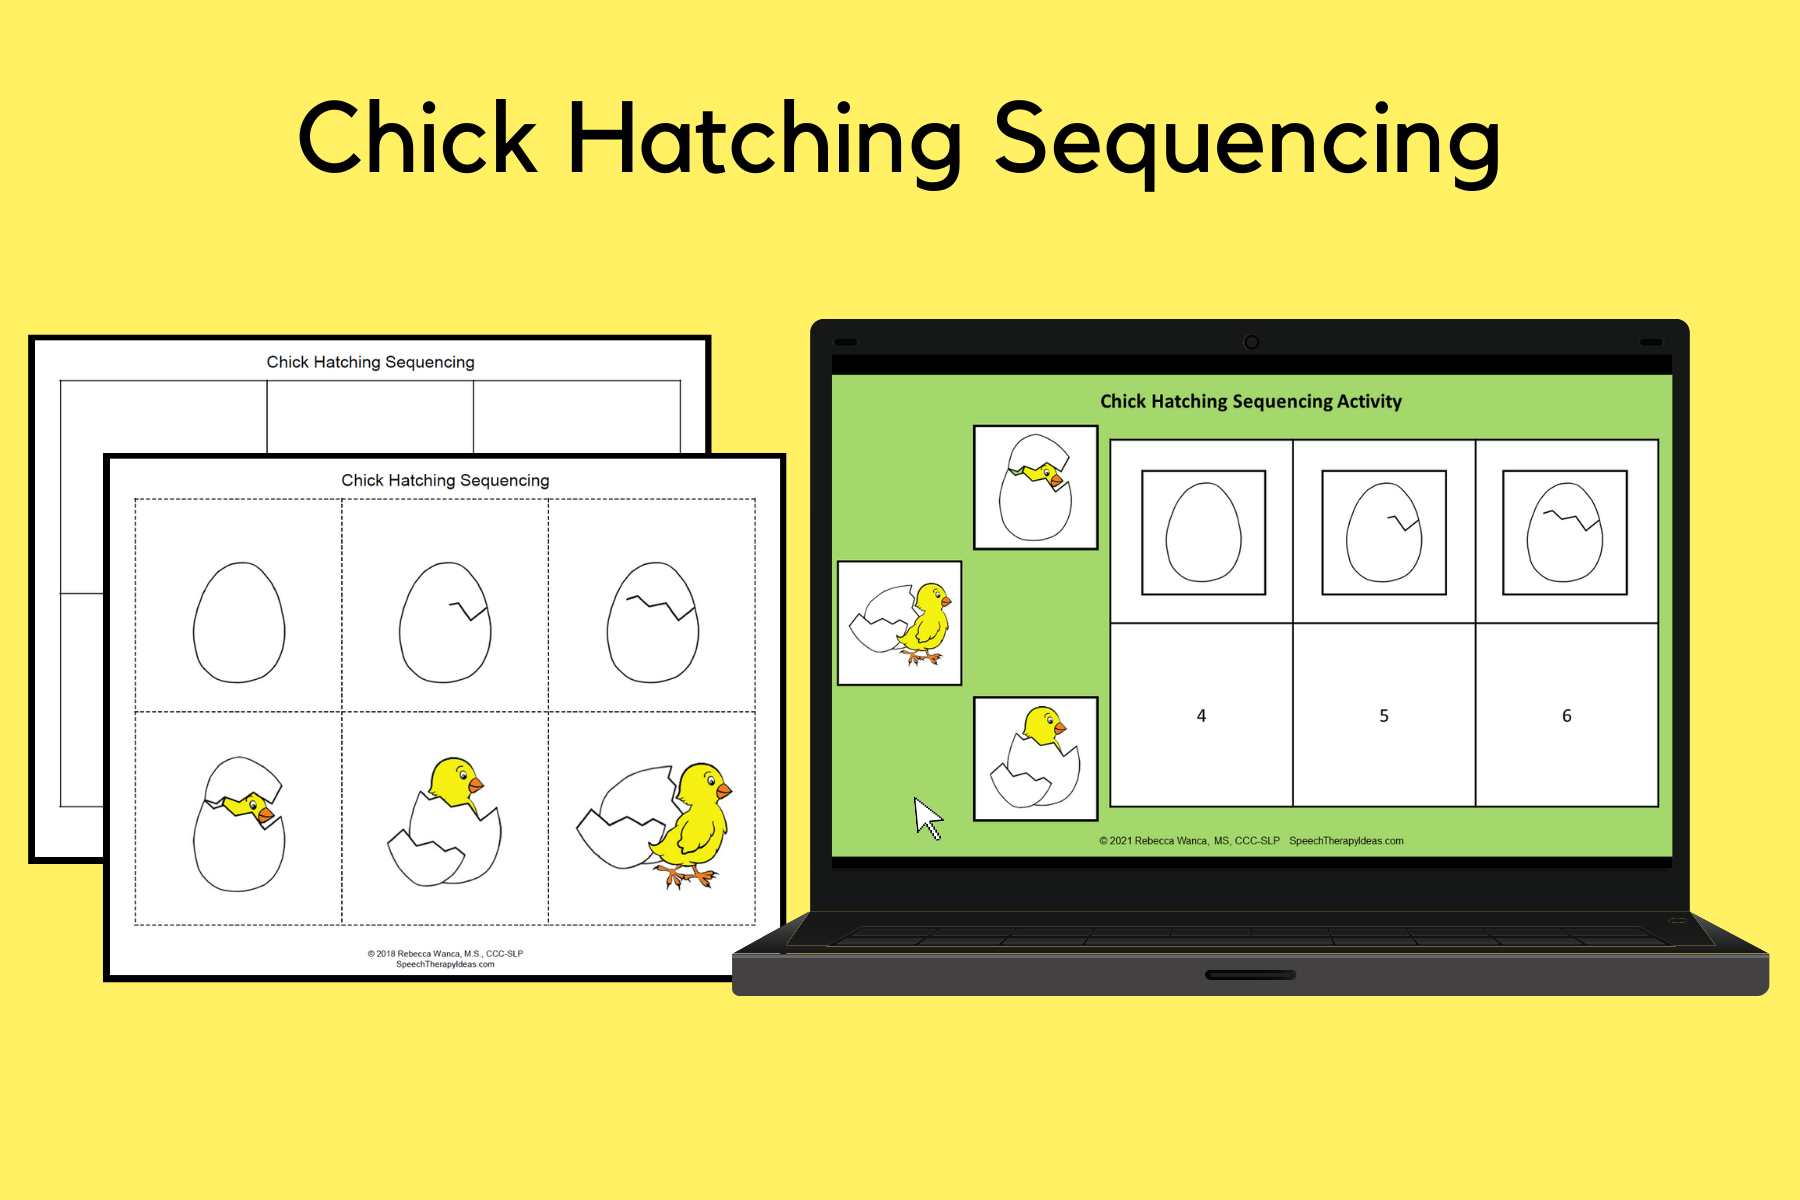 Chick Hatching Sequencing Activity